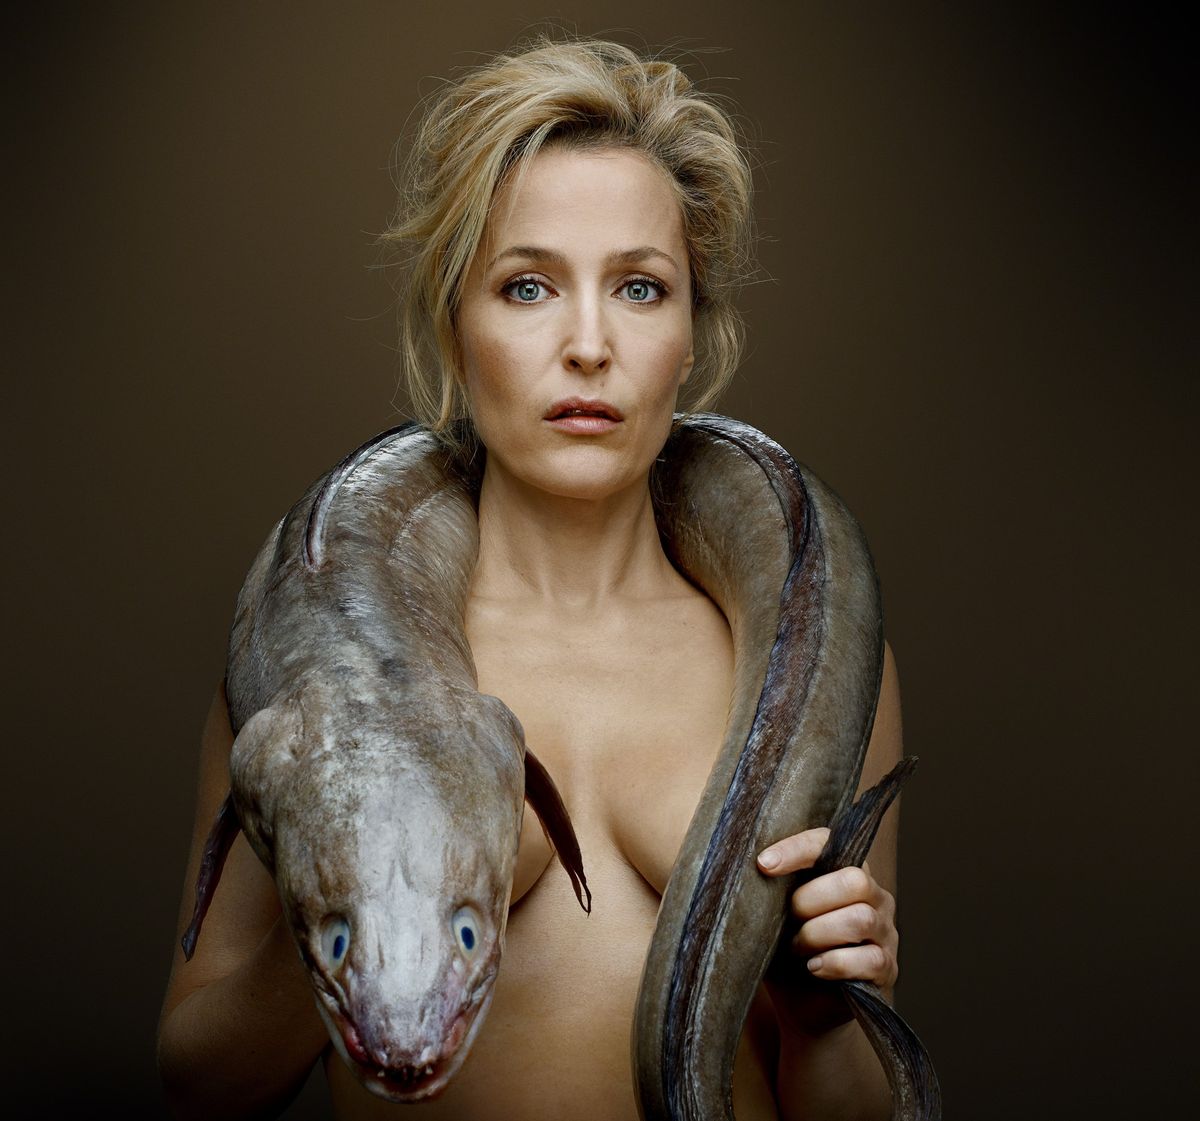 Gillian Anderson poses topless with a conger eel   (Denis Rouvre/Fishlove)